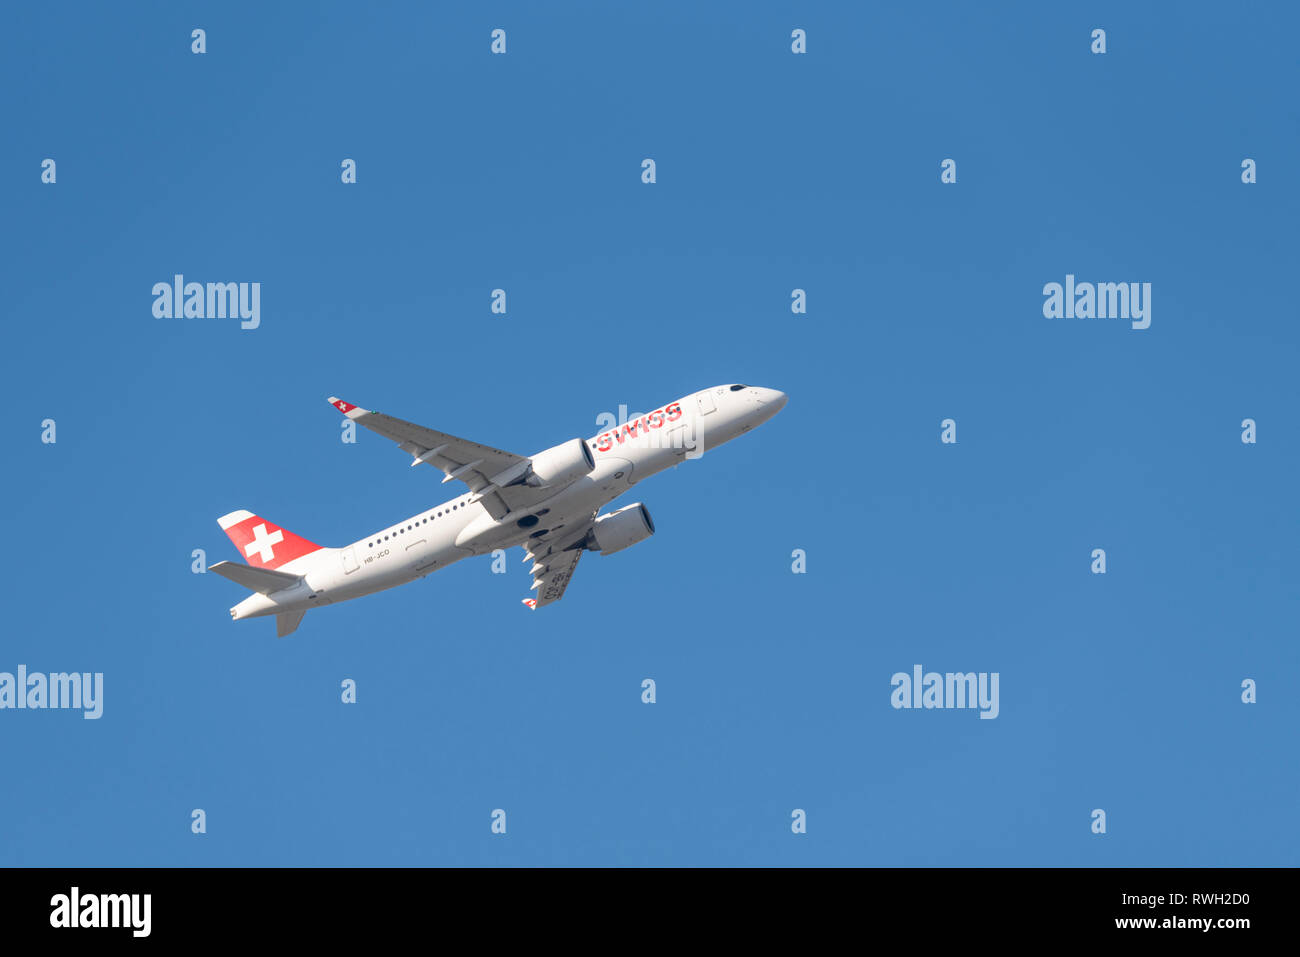 Swiss Airbus A220 jet plane airliner HB-JCO taking off from London Heathrow Airport, UK, in blue sky. Swiss International Air Lines. Space for copy Stock Photo